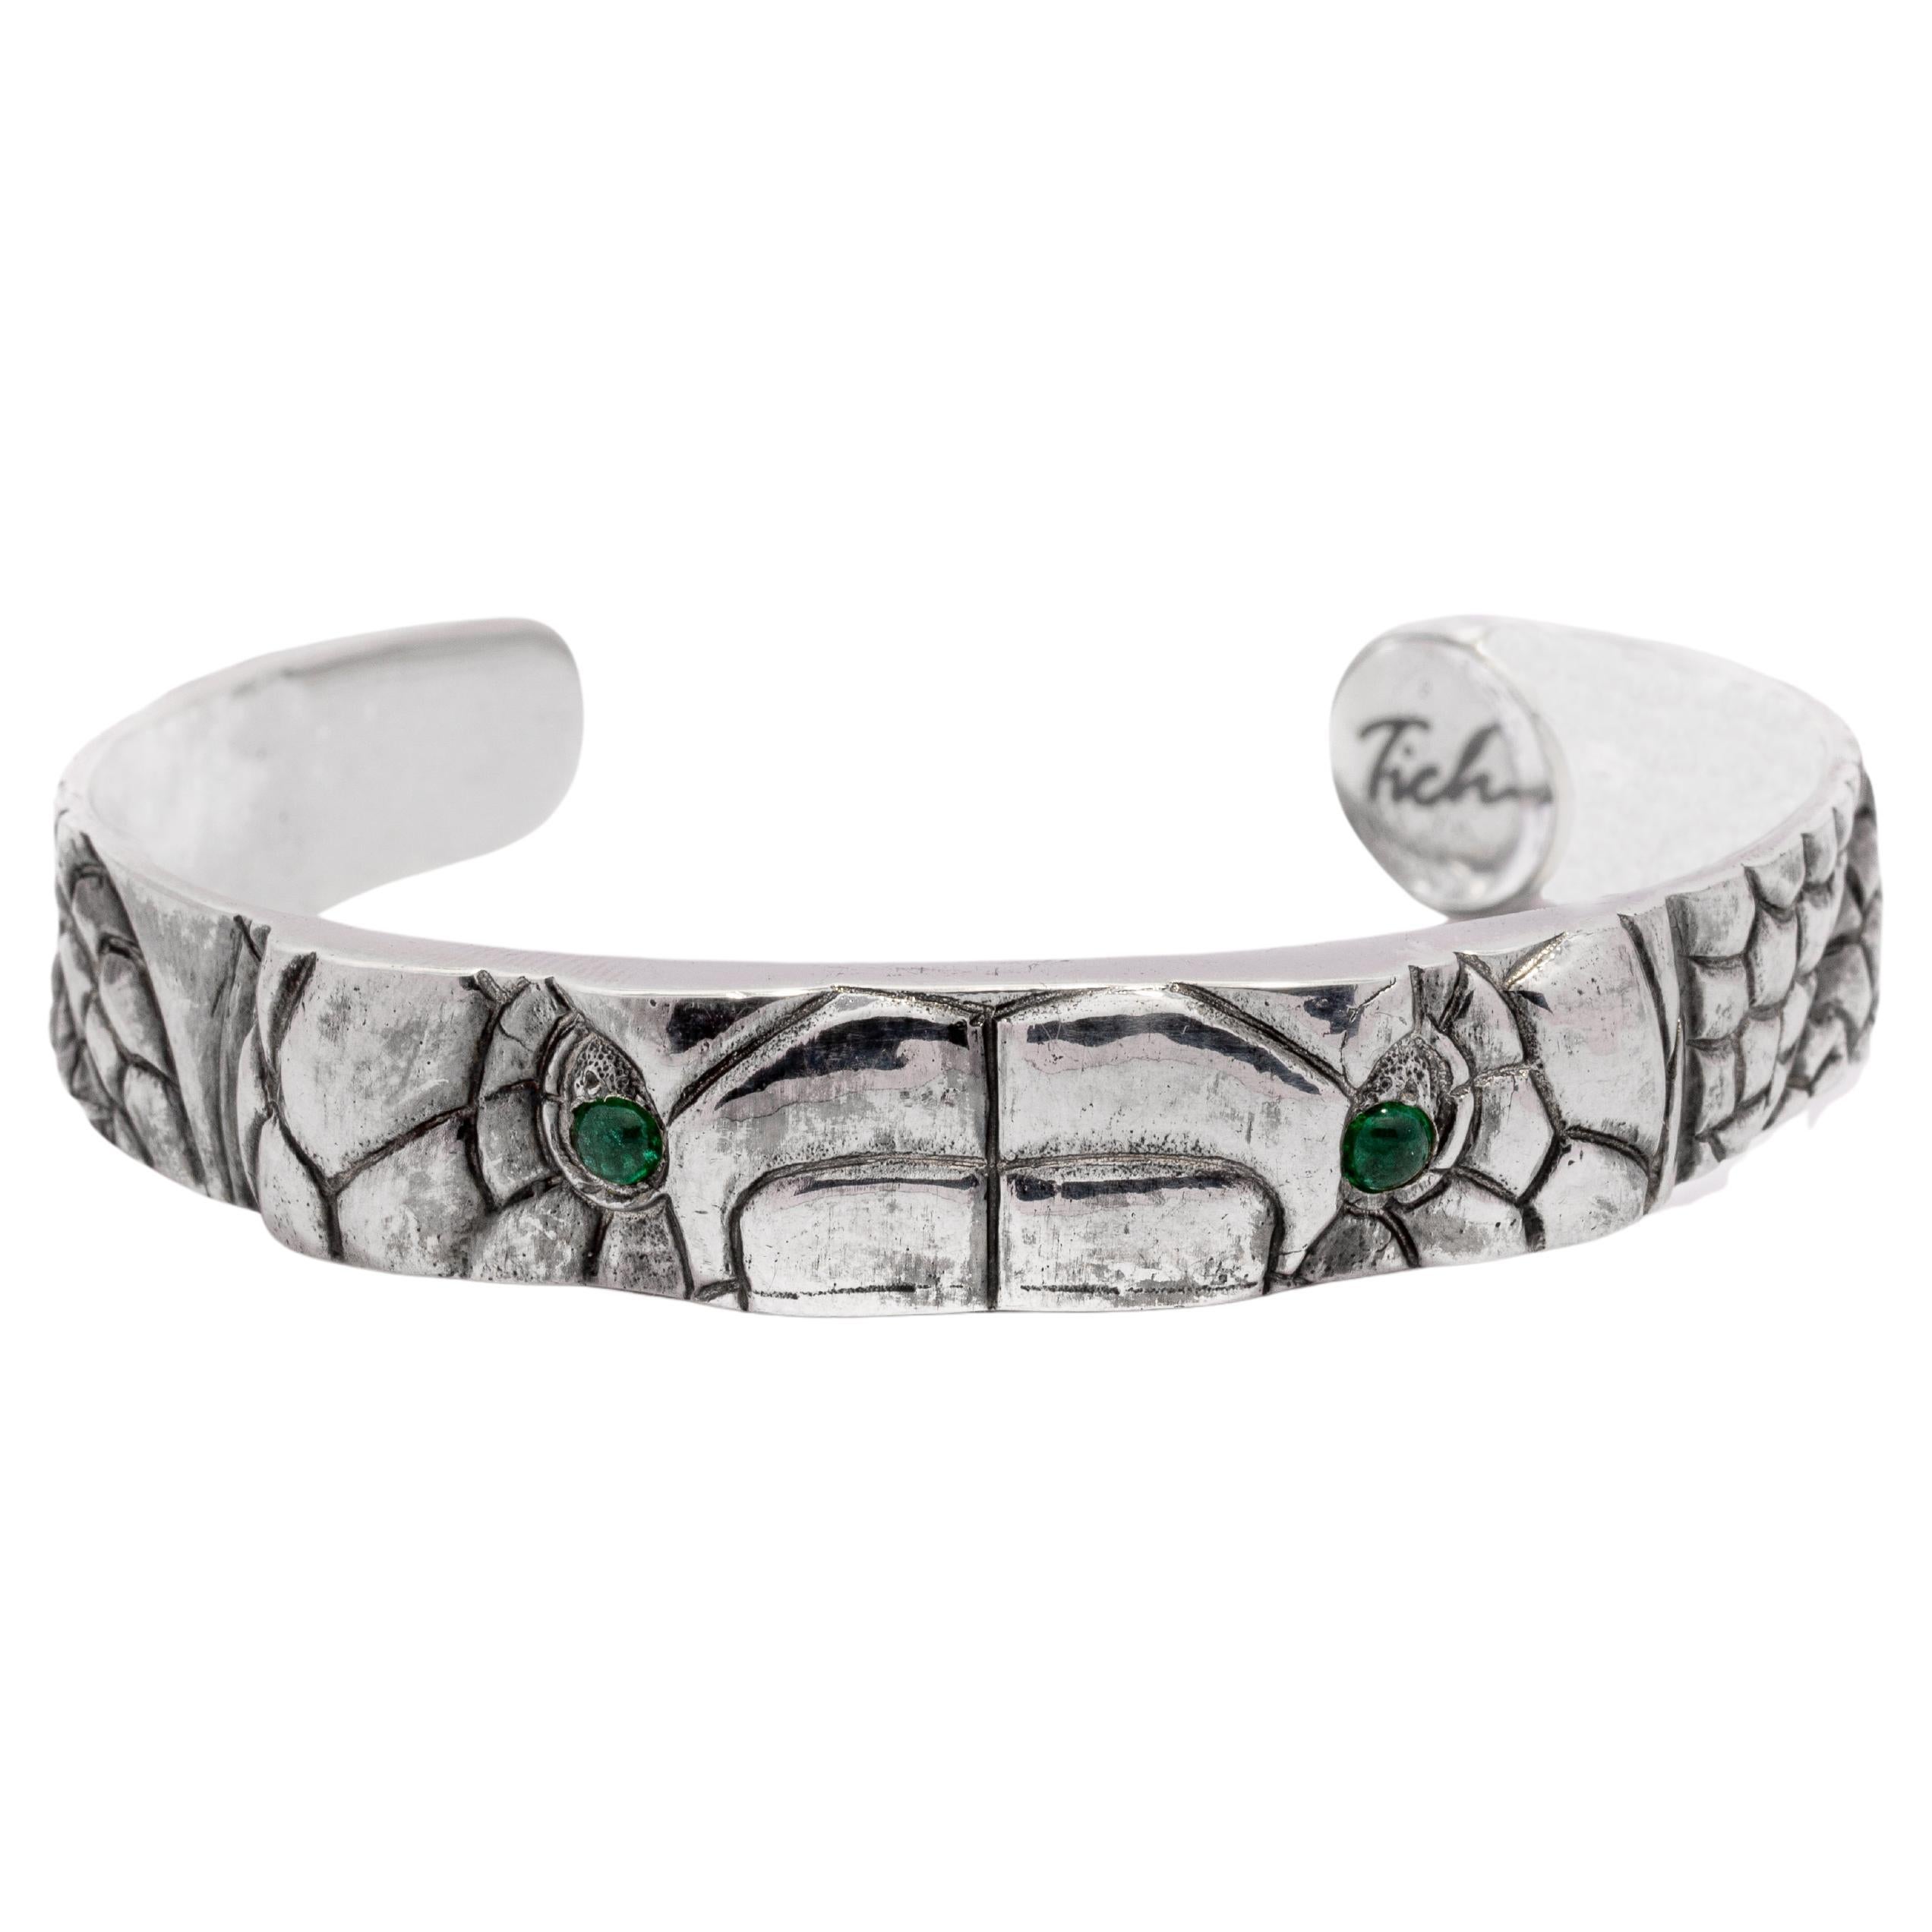 Tichu Emerald Snake Eye Cuff Sterling Silver and Crystal Quartz Size M For Sale